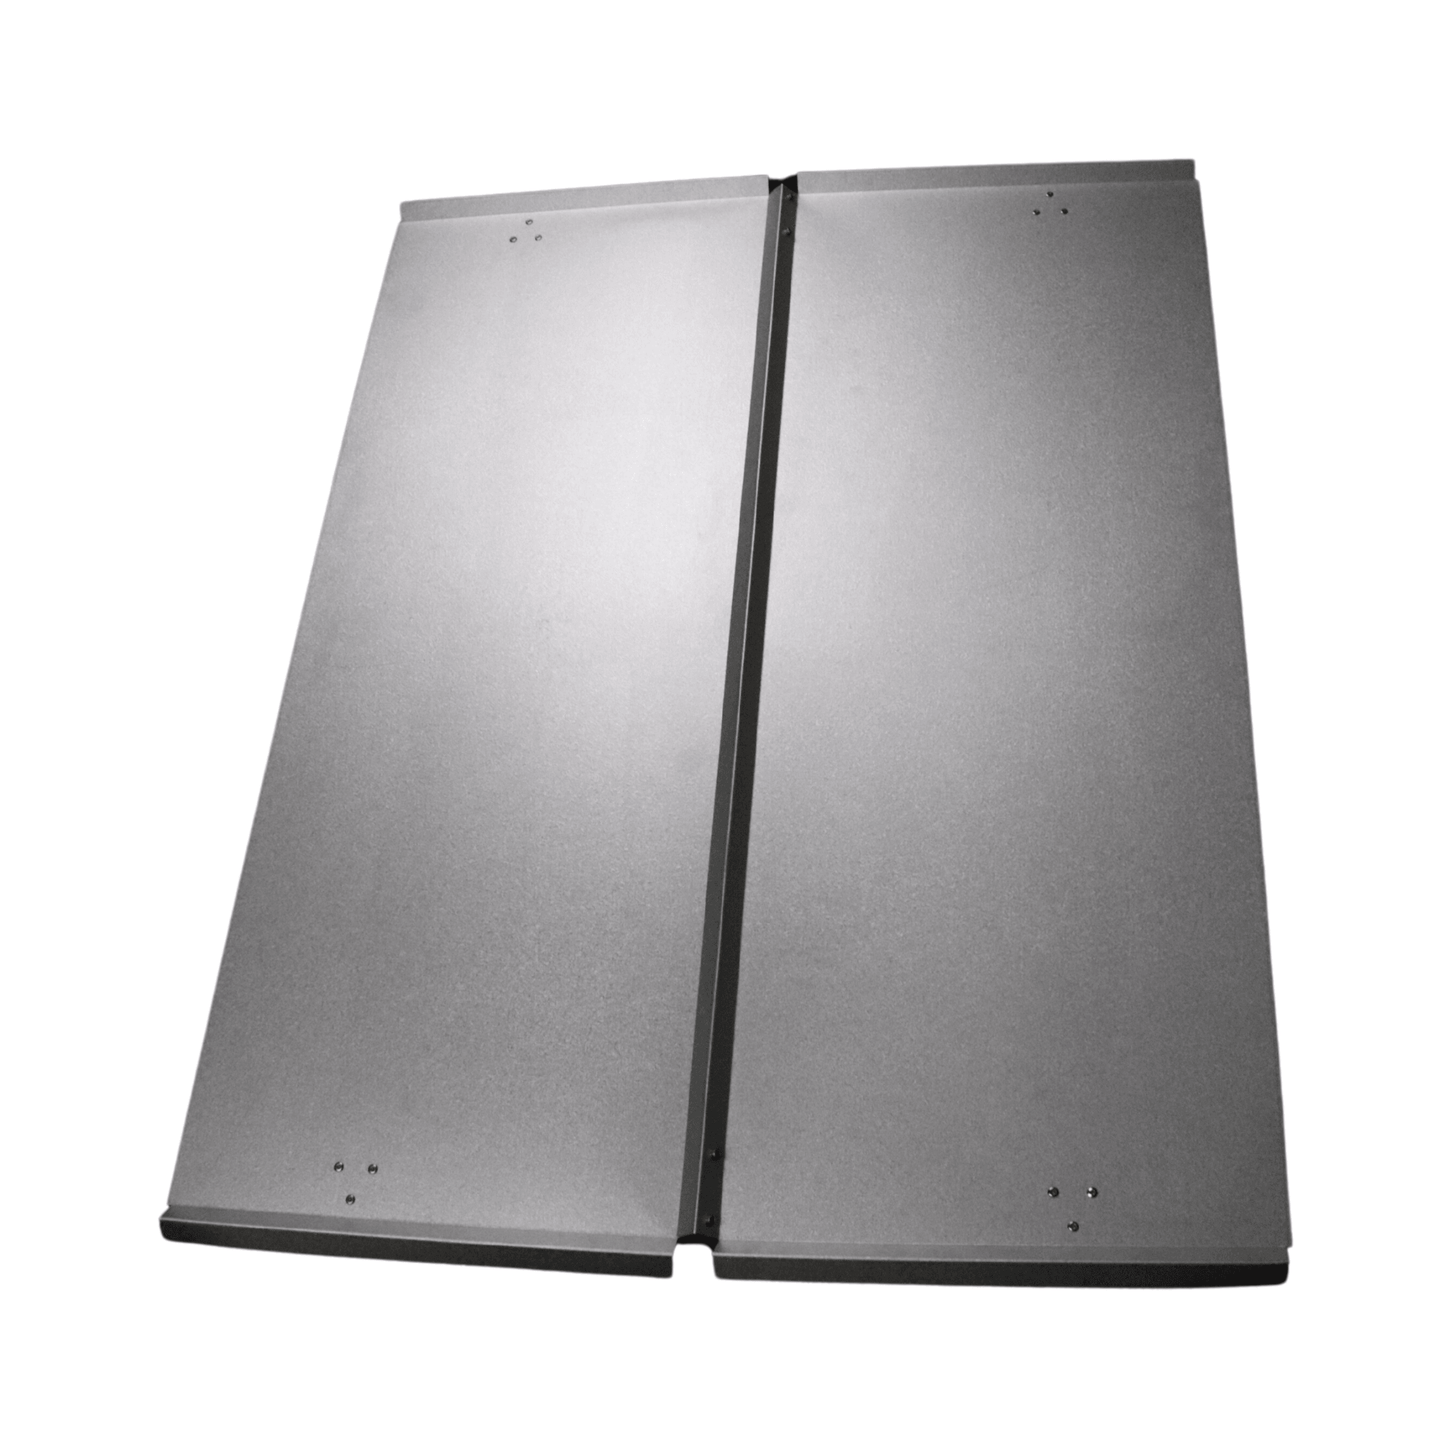 Vents Airlite Series Outdoor Cover